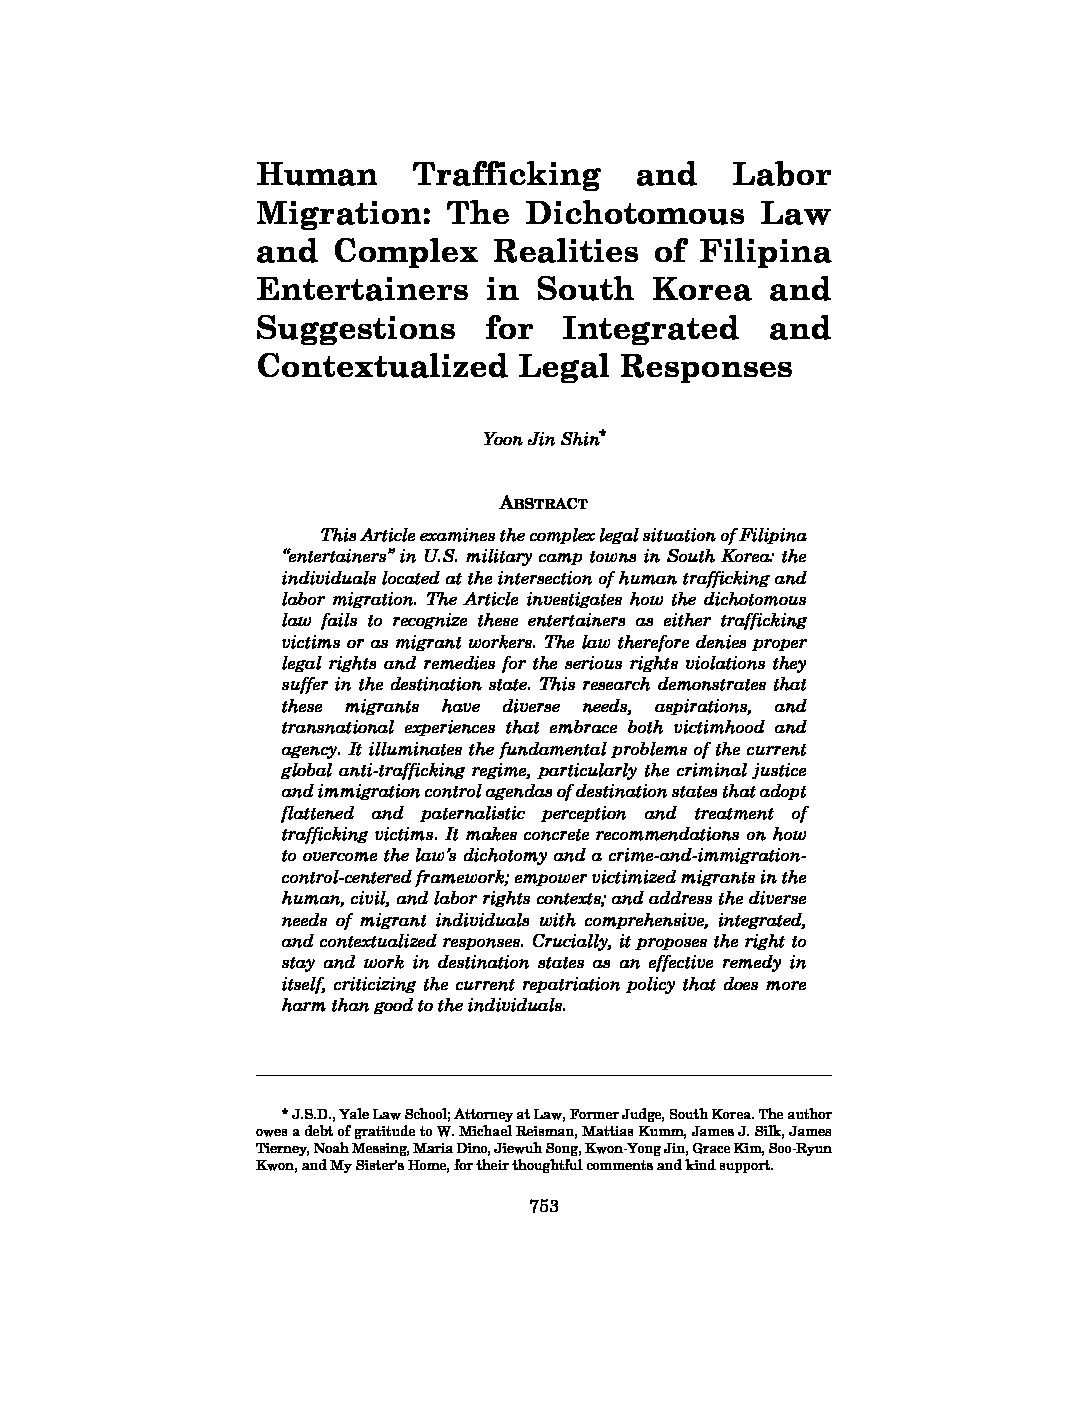 Human Trafficking and Labor Migration: The Dichotomous Law and Complex Realities of Filipina Entertainers in South Korea and Suggestions for Integrated and Contextualized Legal Responses